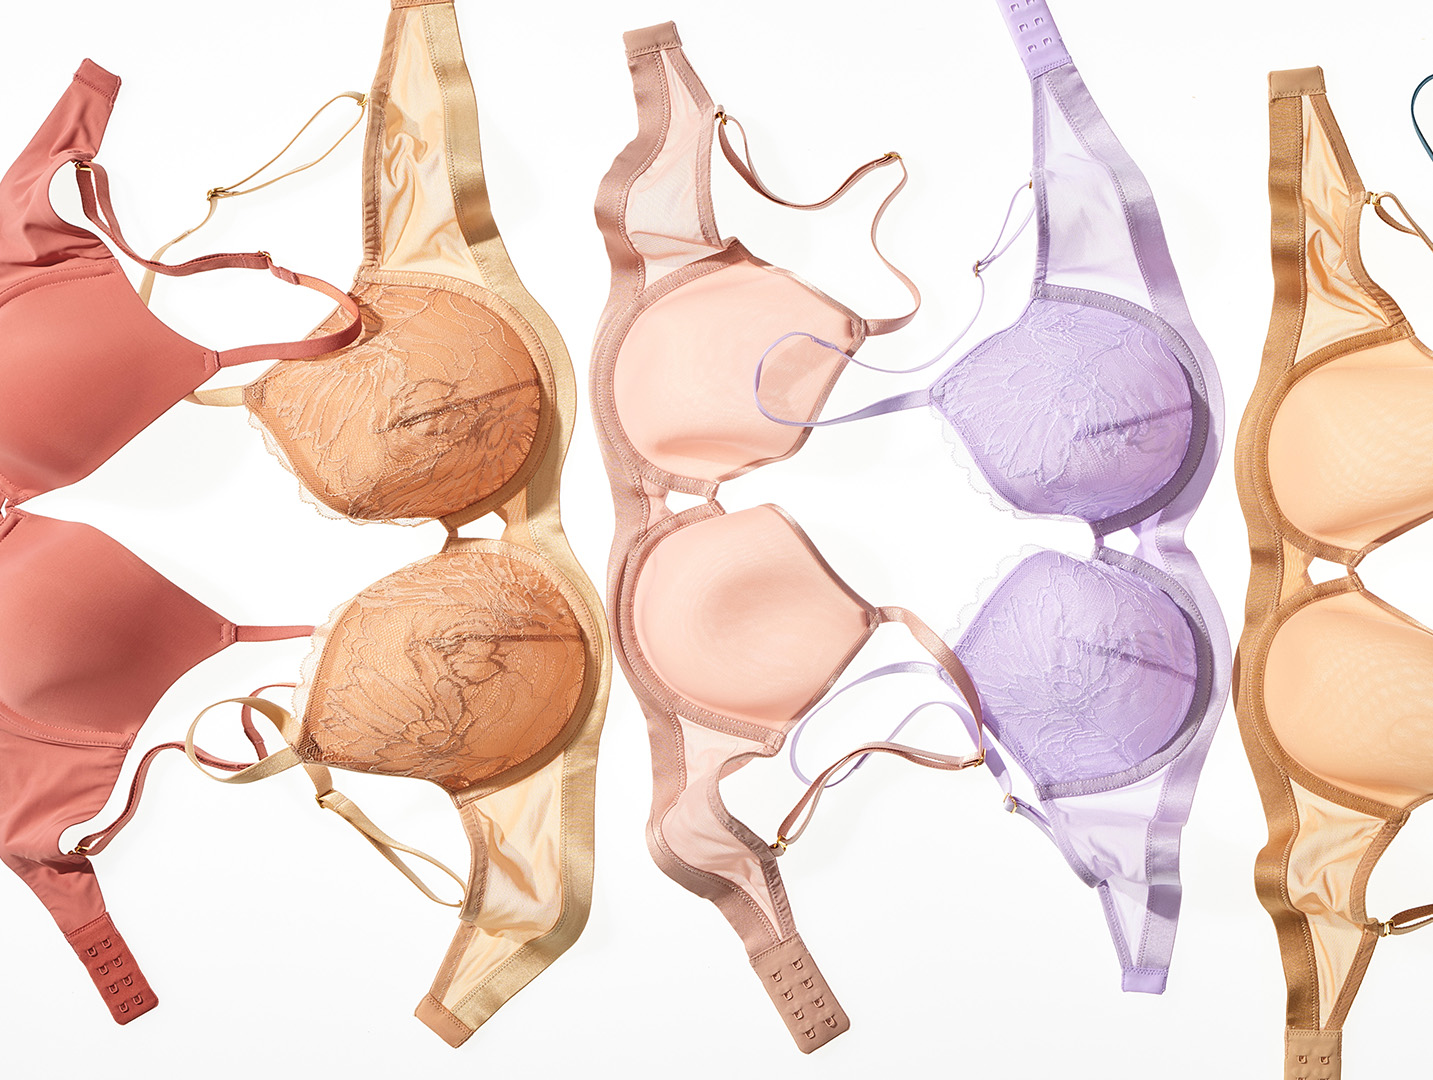 The Truth About Beige Bras: Do They Mean No Hooking Up